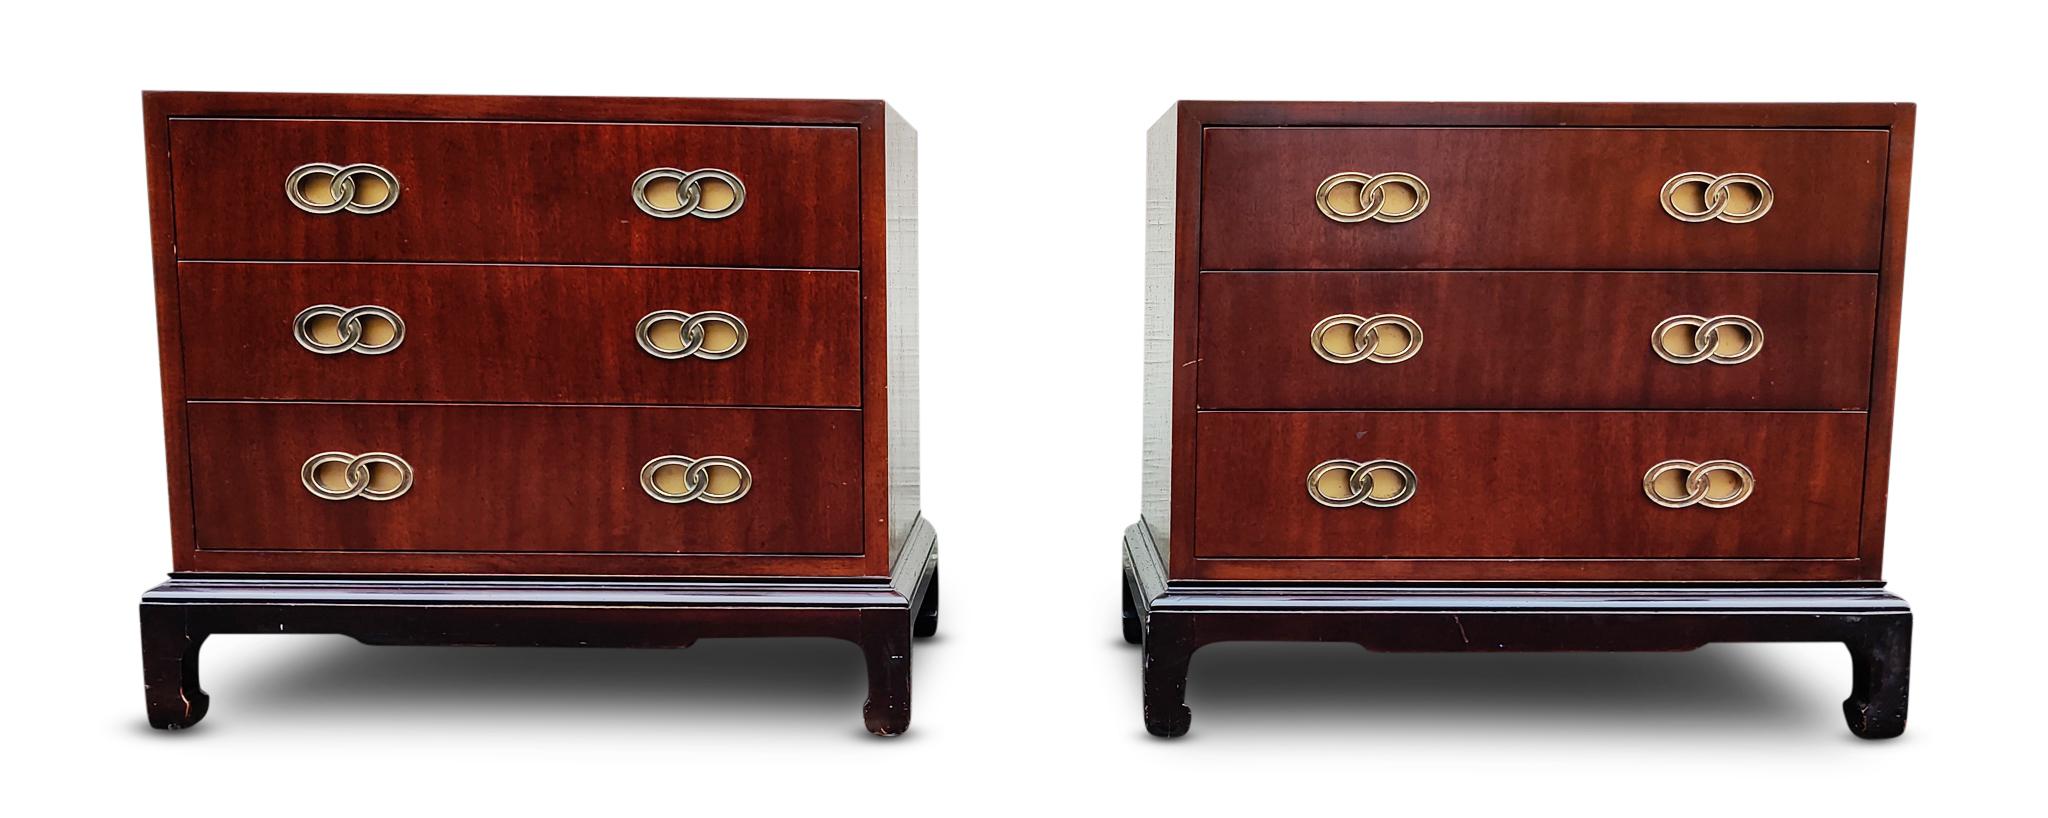 This pair of handsome nightstands or end tables were designed and produced by Henredon in the United States circa 1960s. They are made of mahogany covered with a satin finish and set on black enameled bases. The 3 drawers on each nightstand work